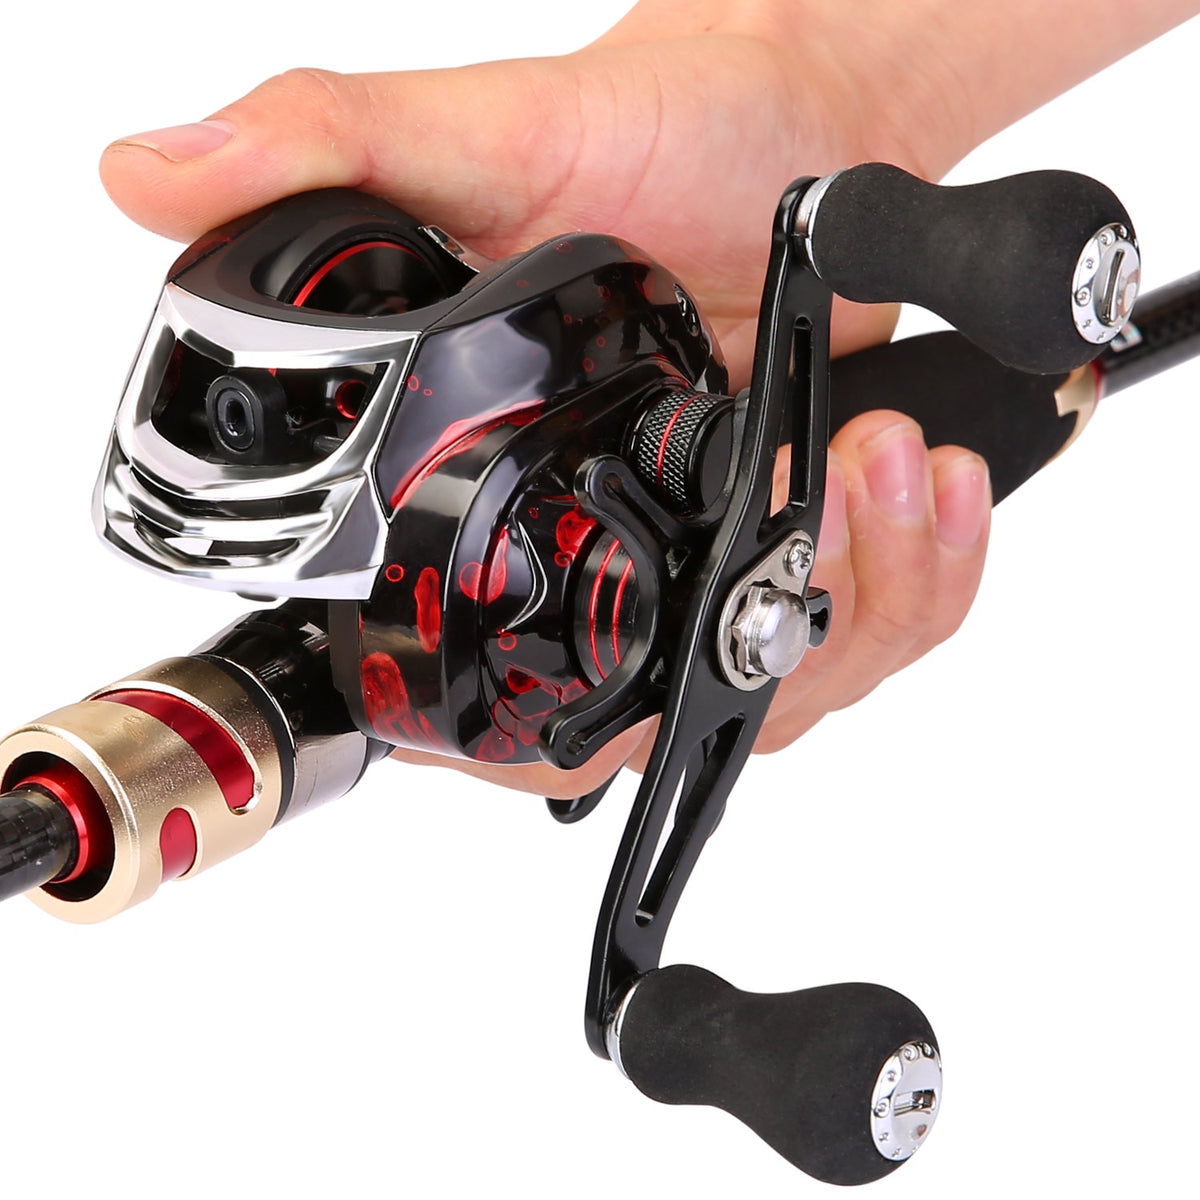 Sougayilang 4 Section Carbon Fiber Casting Rod and 17+1BB 7.2:1 High Speed  Baitcasting Reel Fishing Combo Portable for Travel